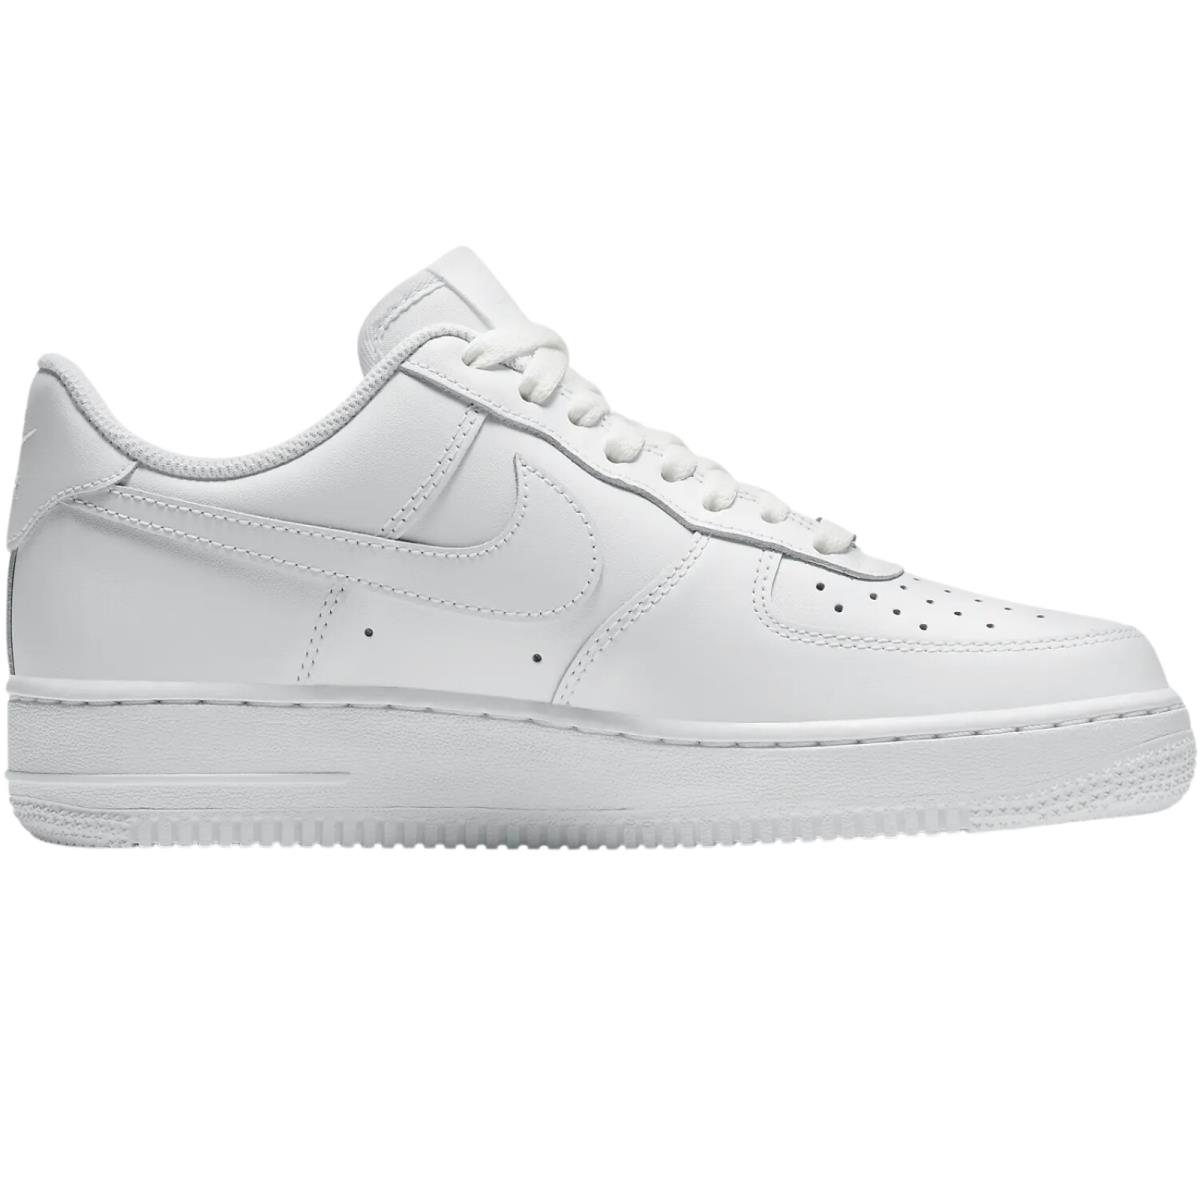 Nike Air Force 1 Women`s Casual Shoes All Colors US Sizes 6-11 White/White/White/White